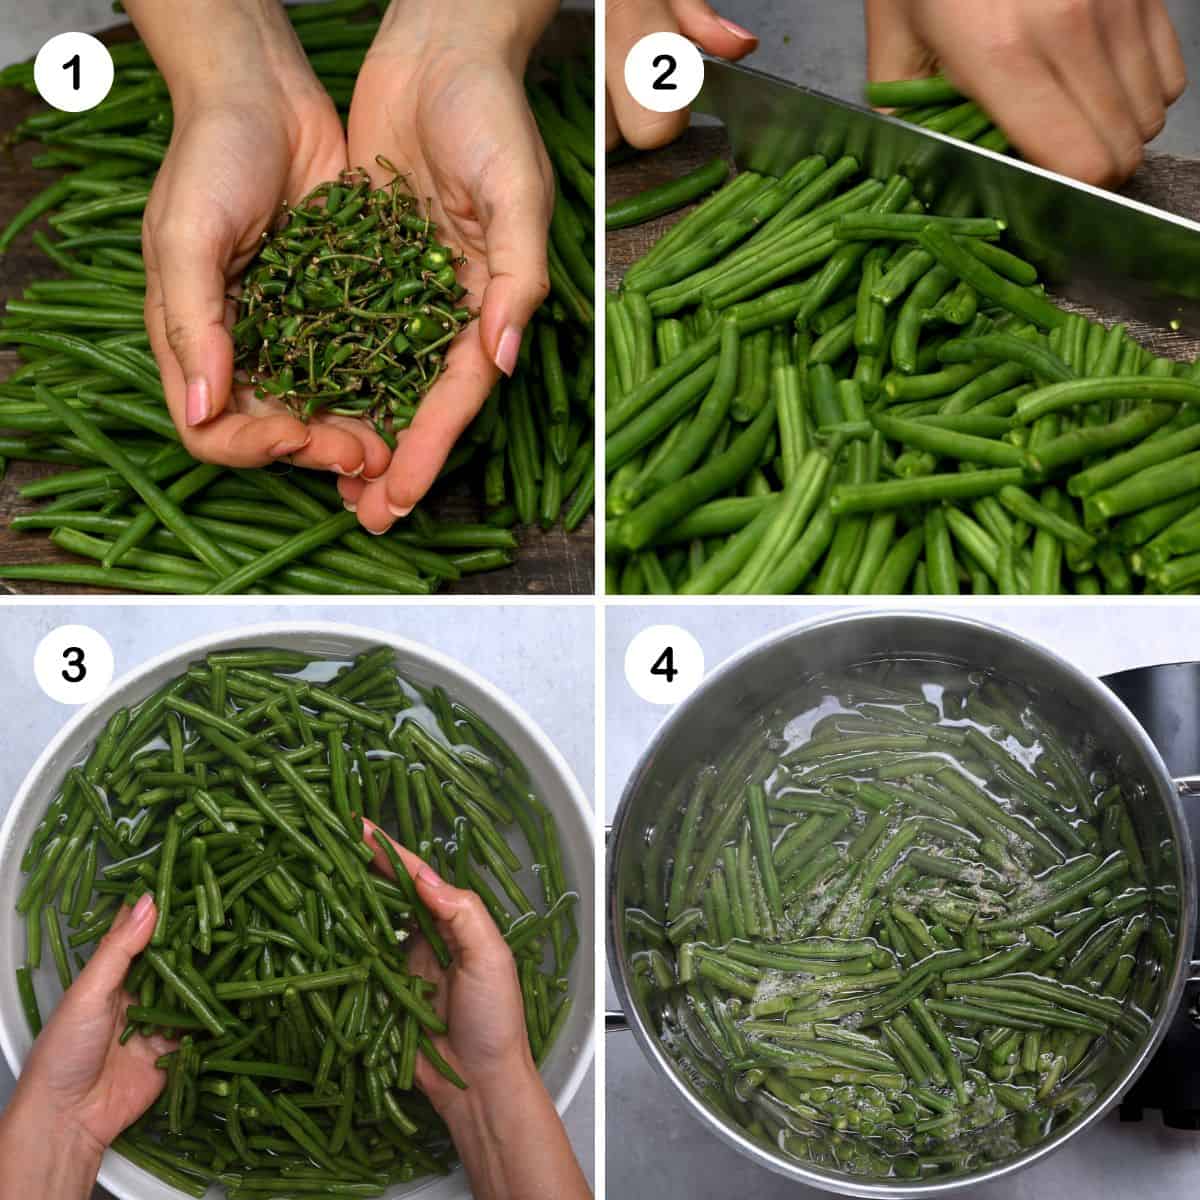 Steps showing how to trim, cut, wash, and coil green beans